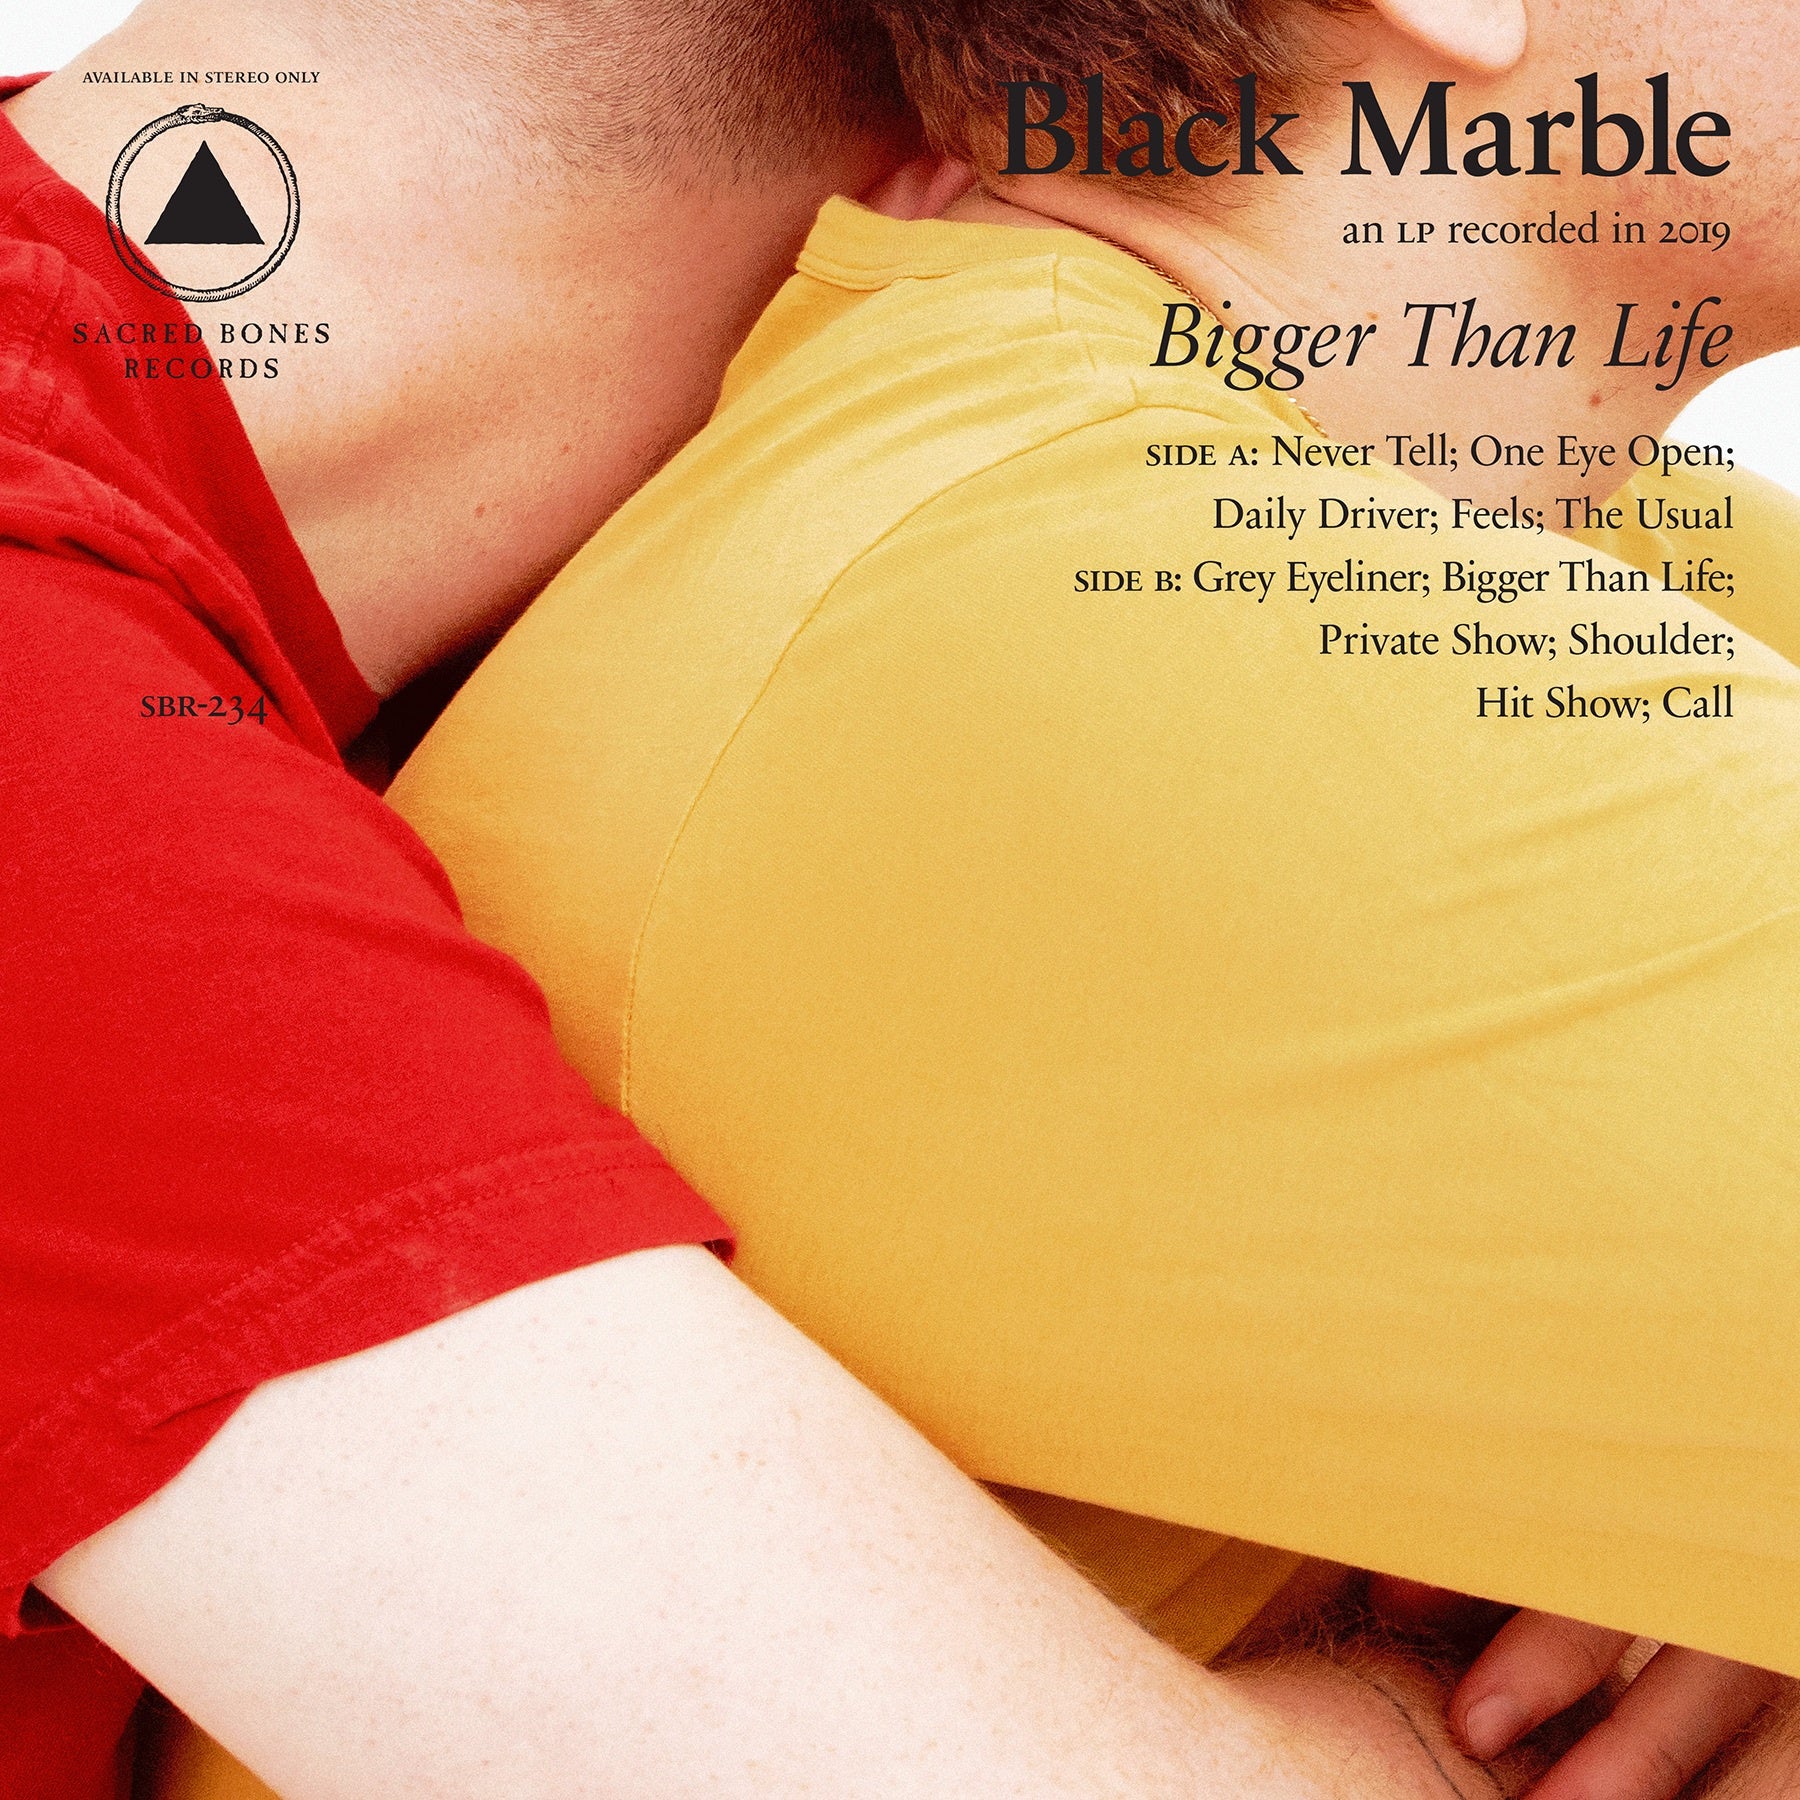 Black Marble - Bigger Than Life - New Lp Record 2019 USA Indie Exclusive Half Red & Half White Vinyl - Synth-pop / Coldwave